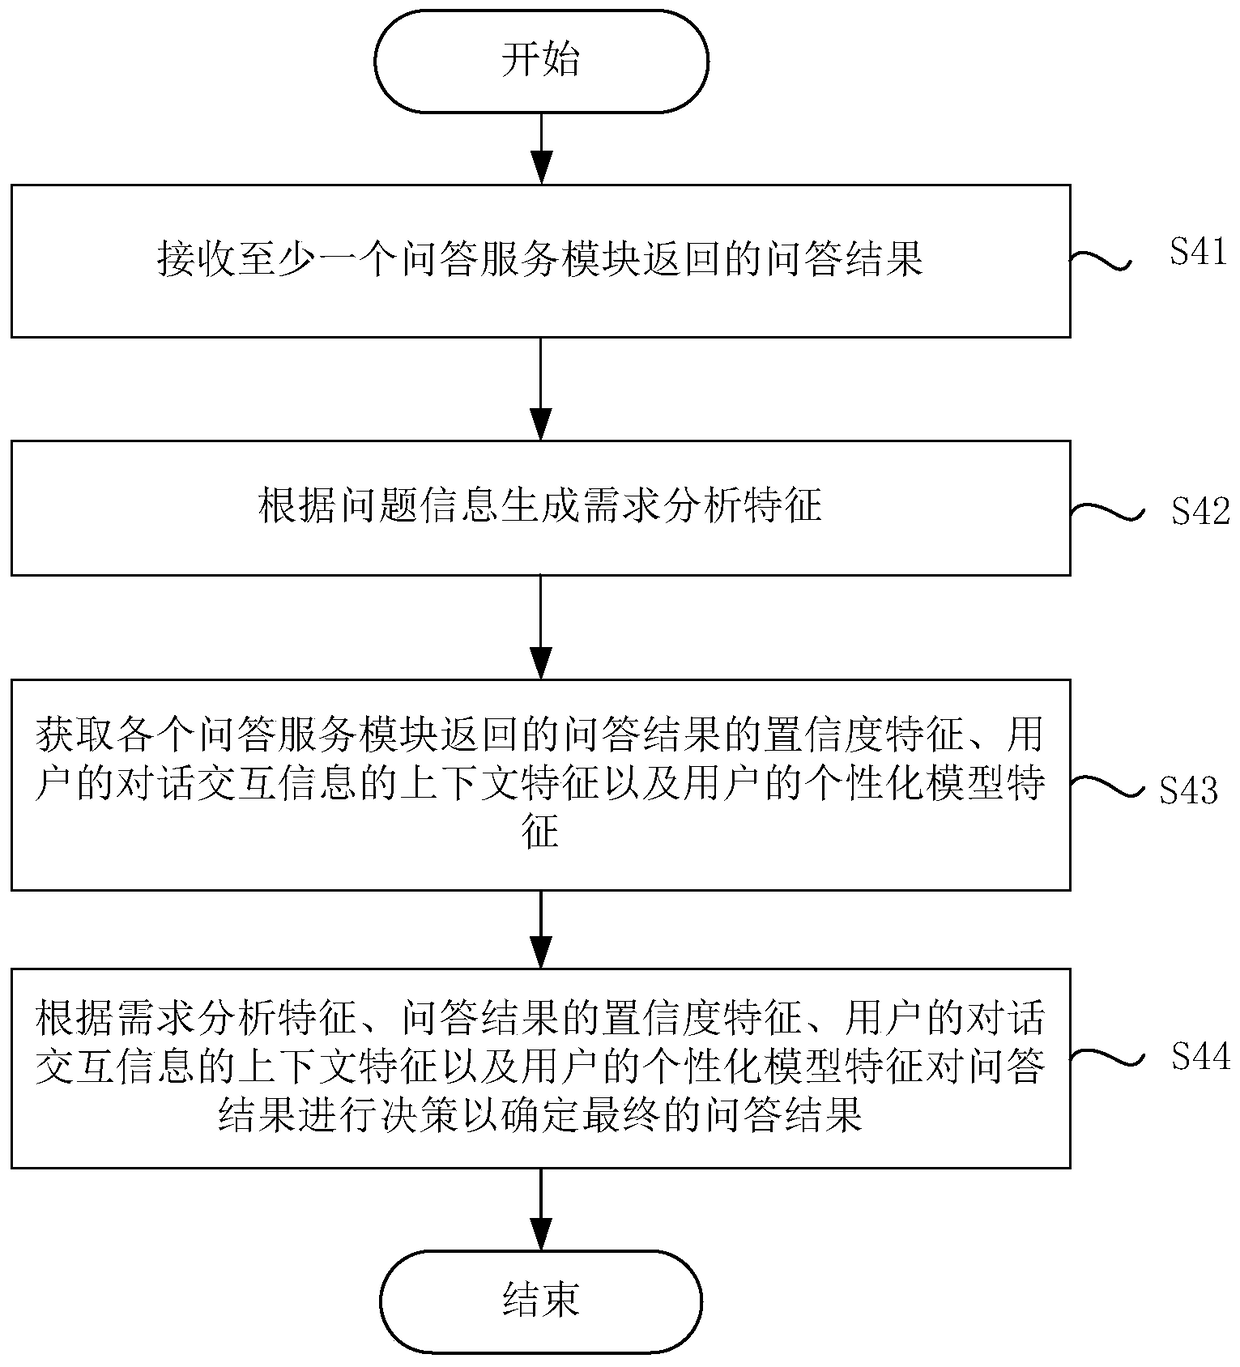 Method and device for providing in-depth question answering service based on artificial intelligence